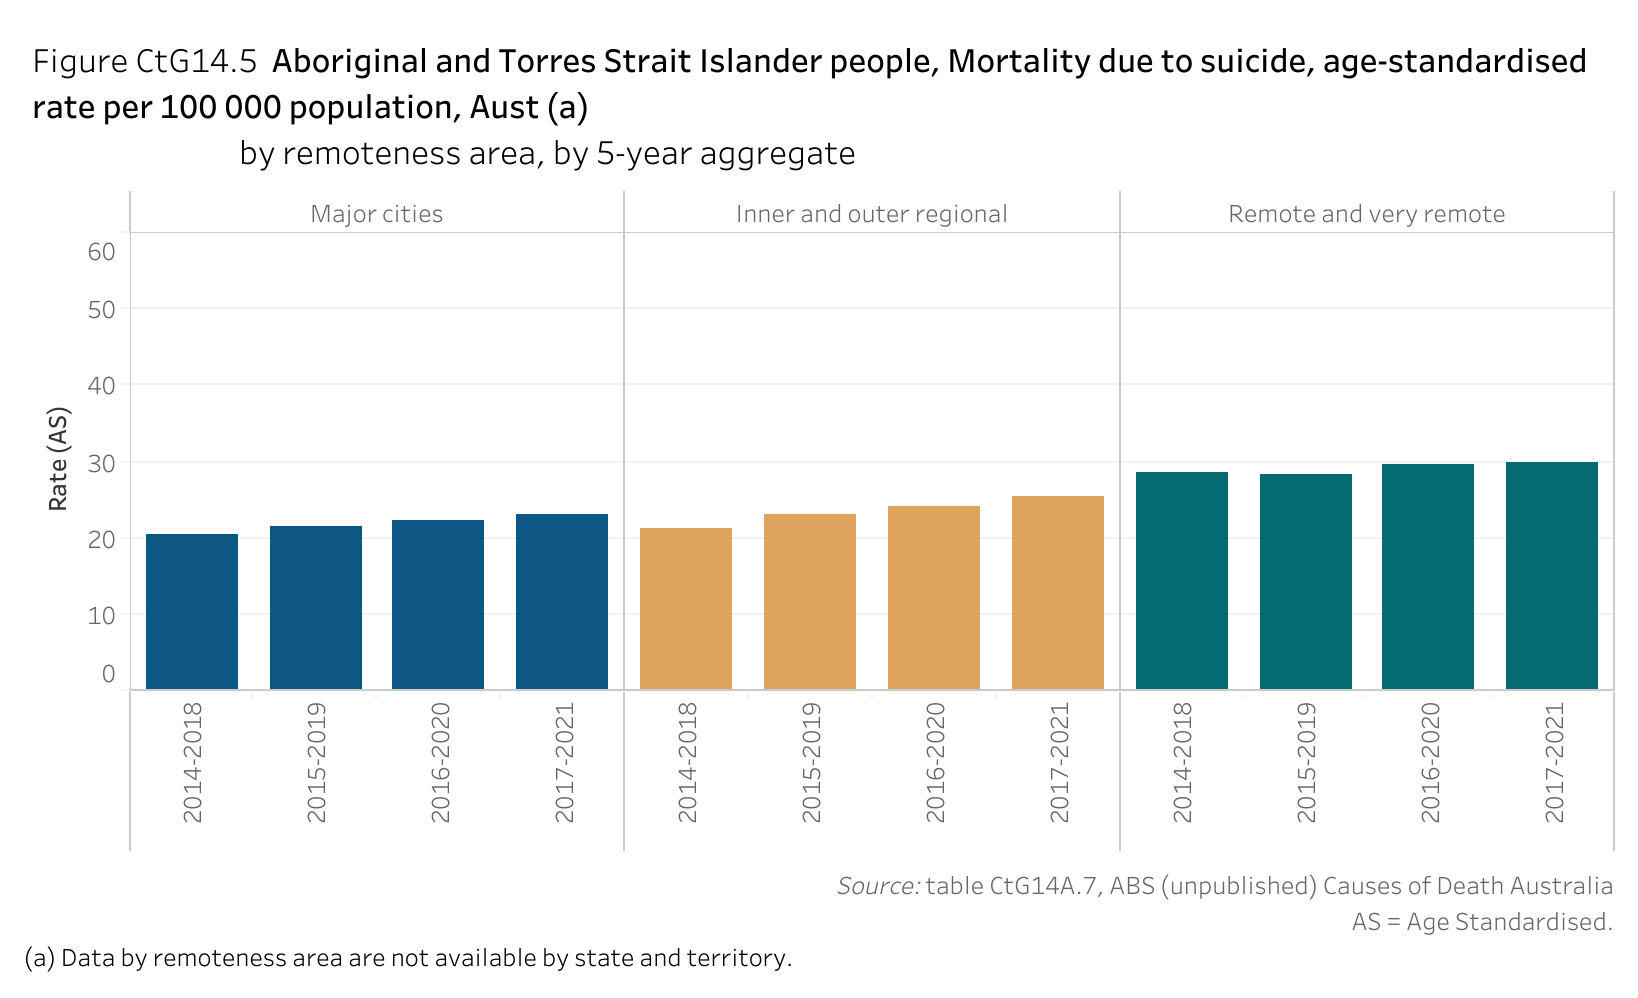 Figure CtG14.5 shows Aboriginal and Torres Strait Islander people, Mortality due to suicide, age-standardised rate per 100 000 population, Australia, by remoteness area, by 5-year aggregate. More details can be found within the text near this image.